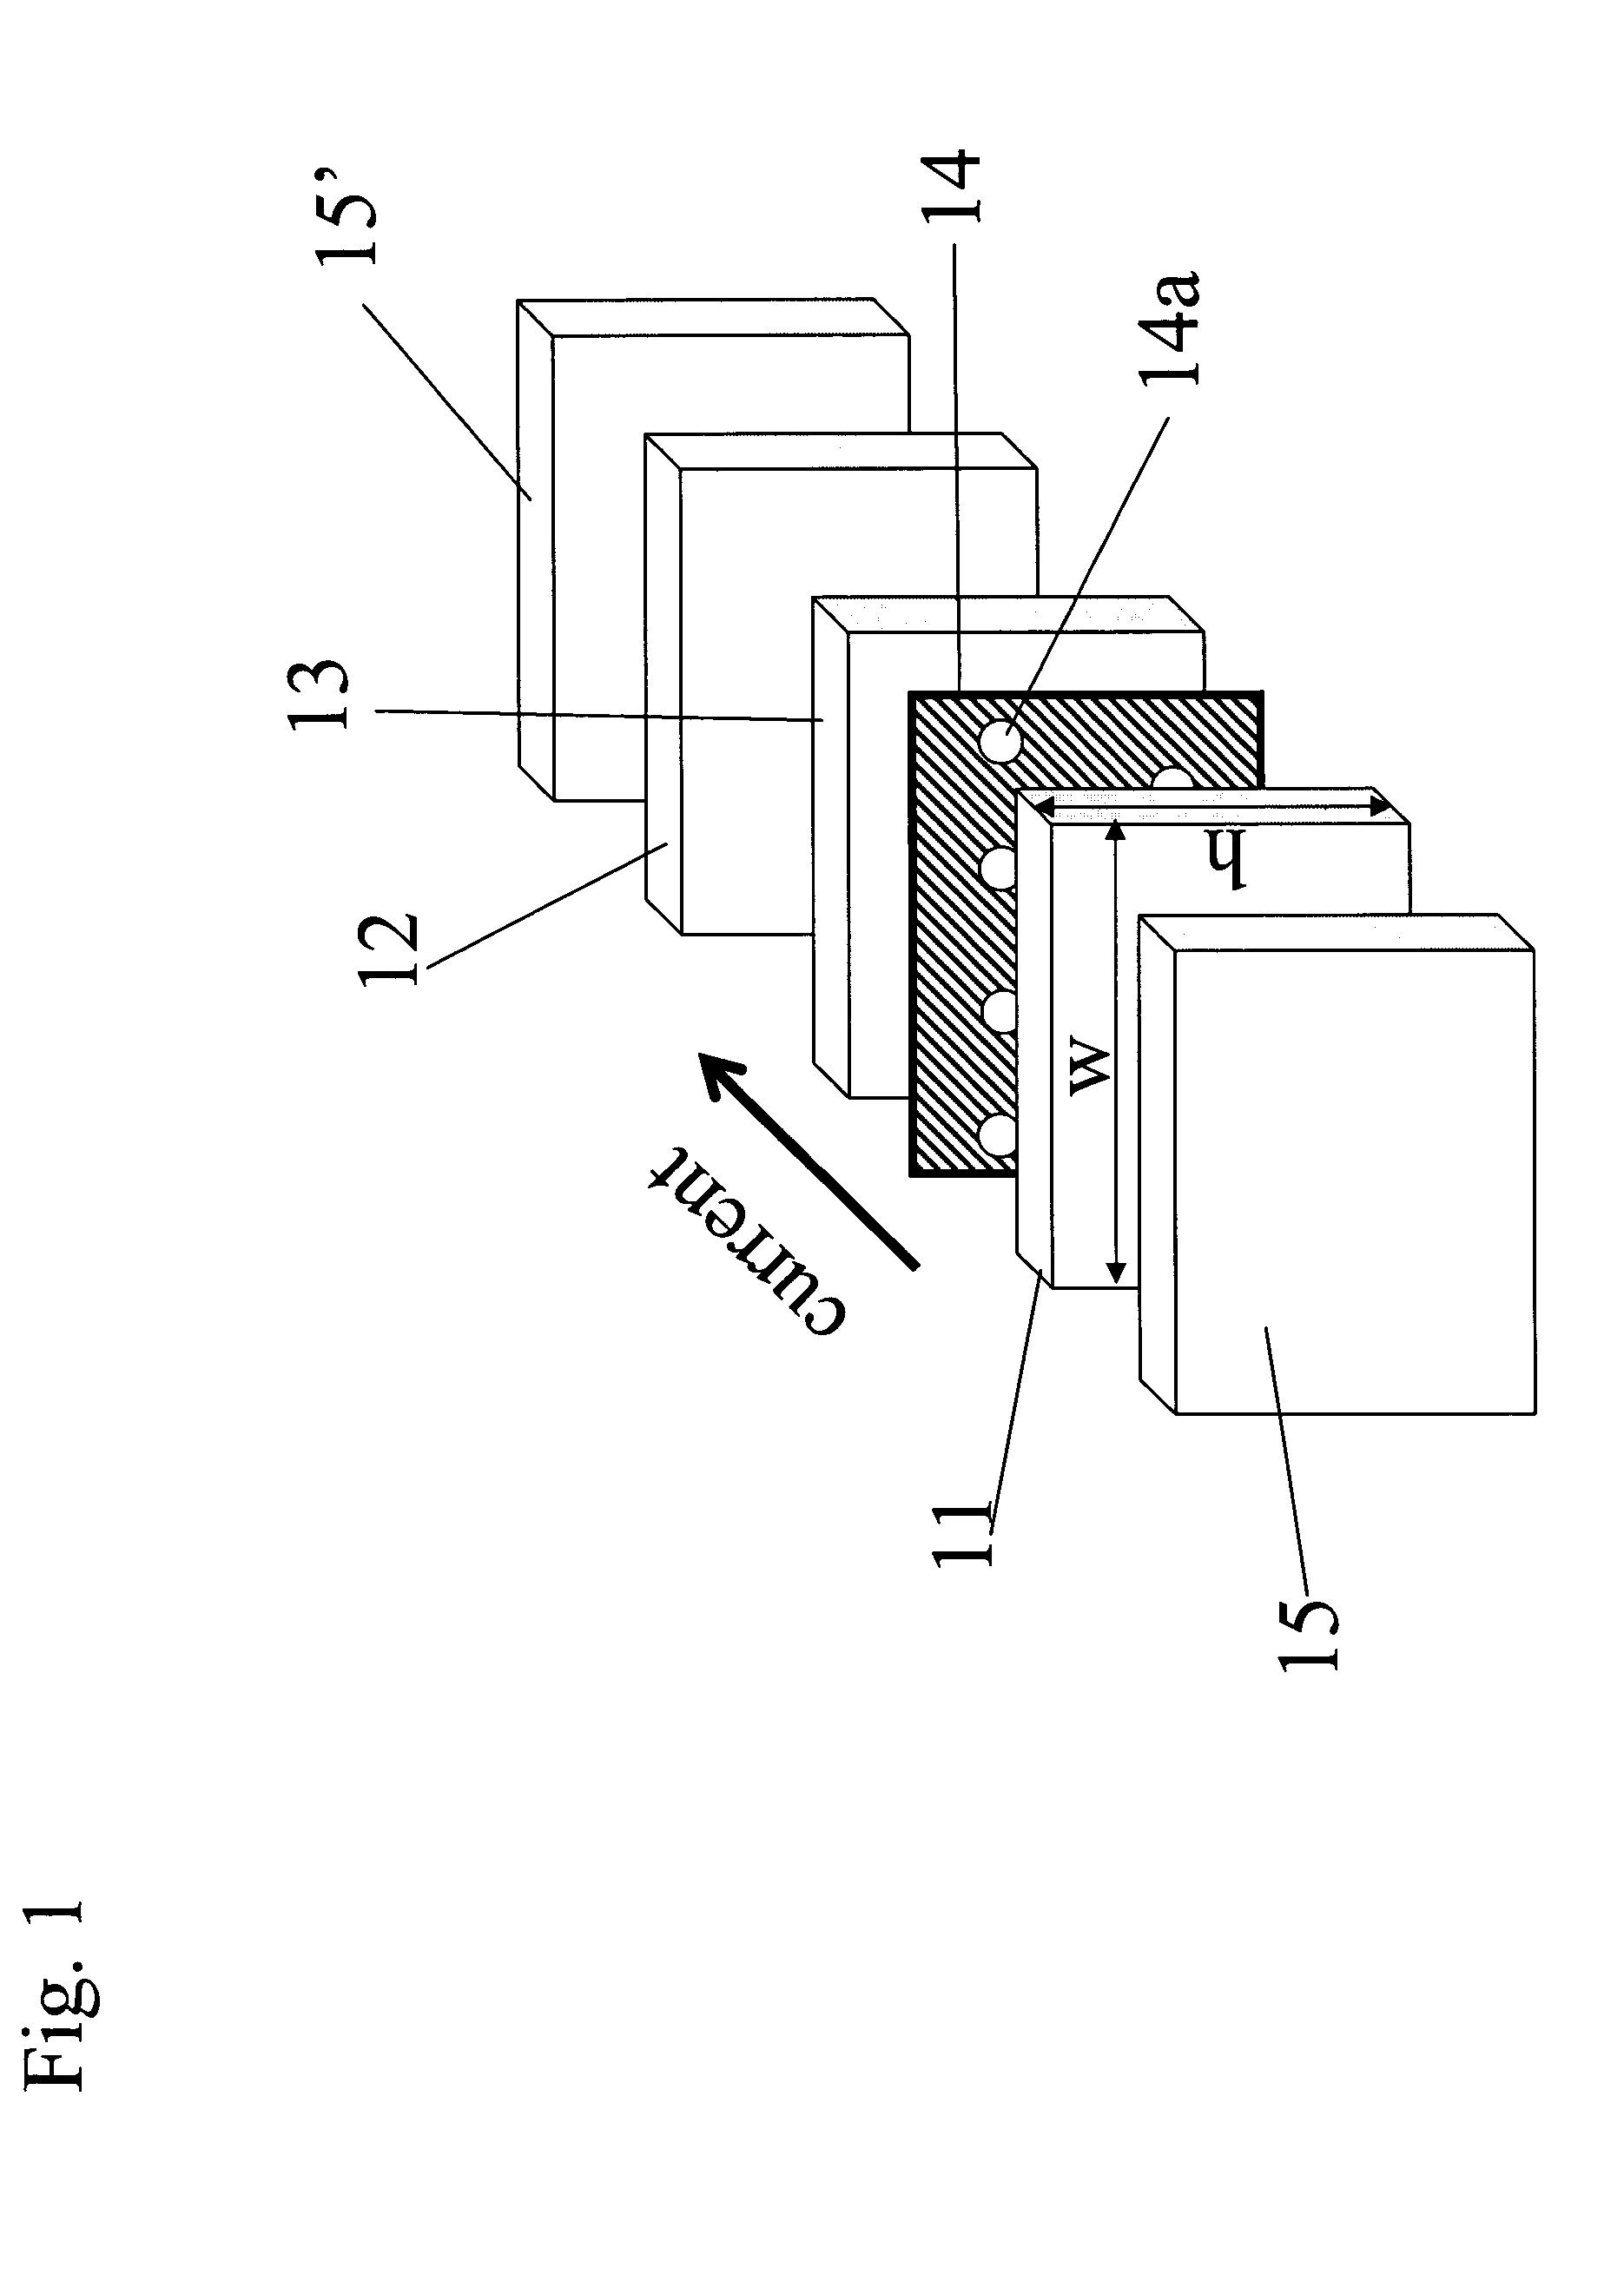 CPP spin-valve element